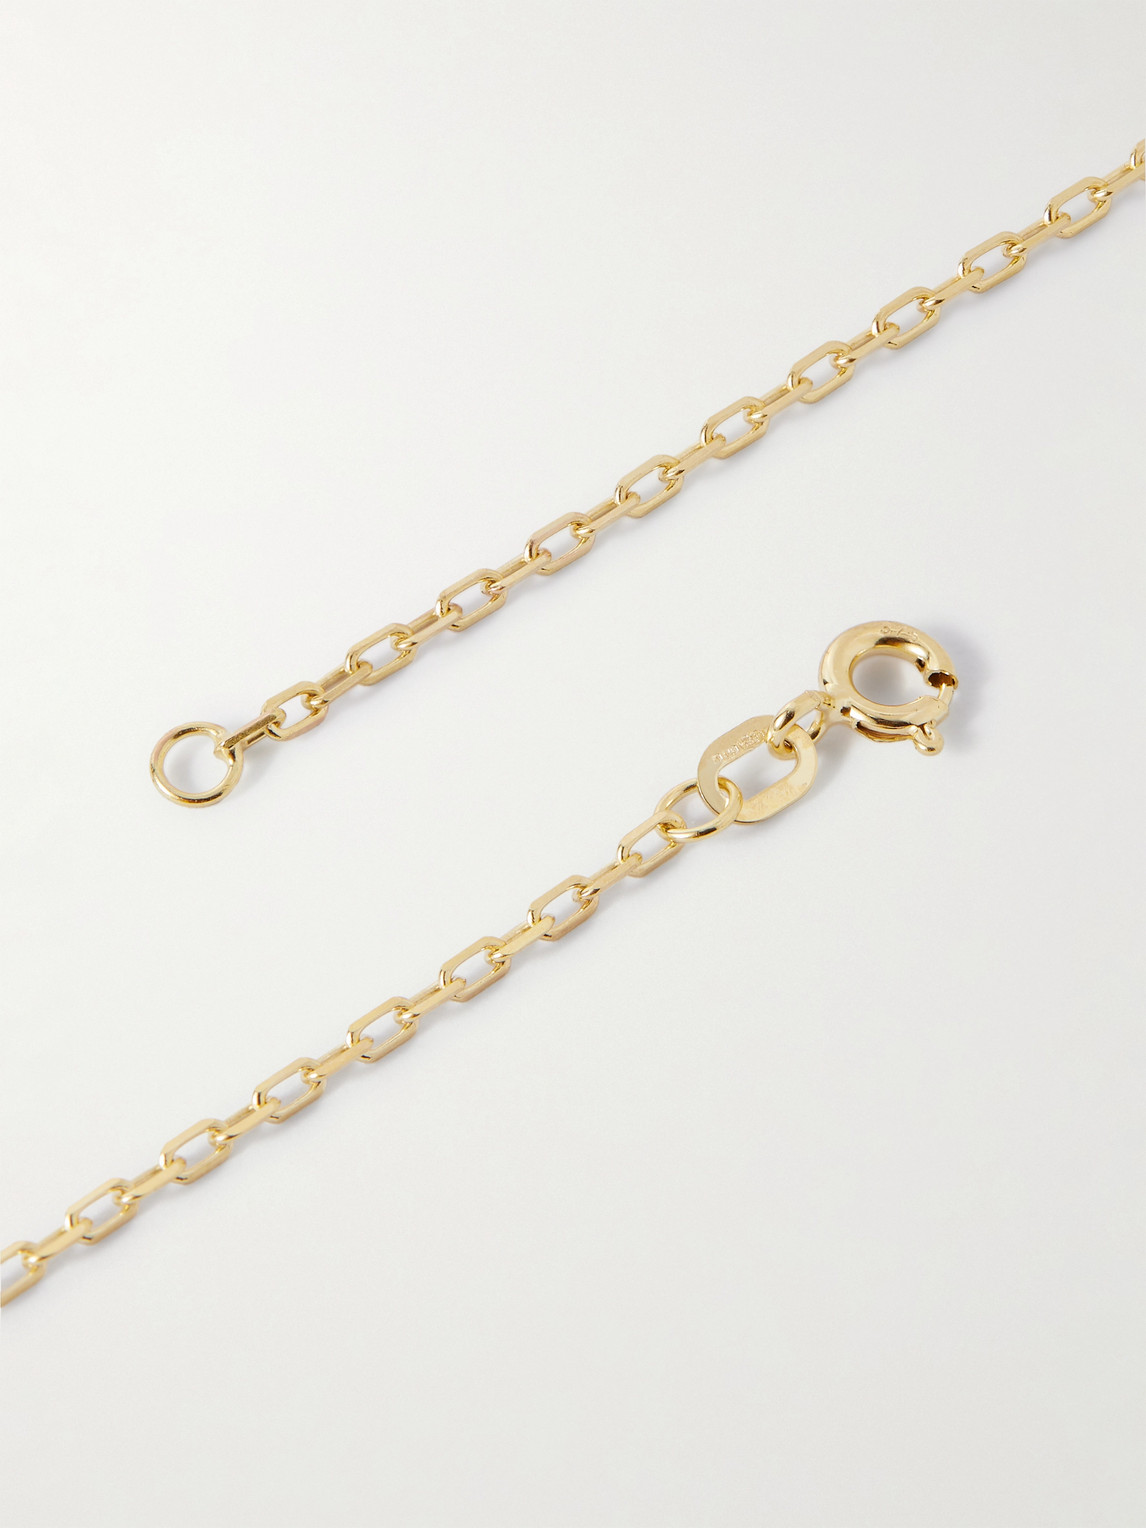 Shop Alice Made This Piccard 9-karat Gold Diamond Necklace